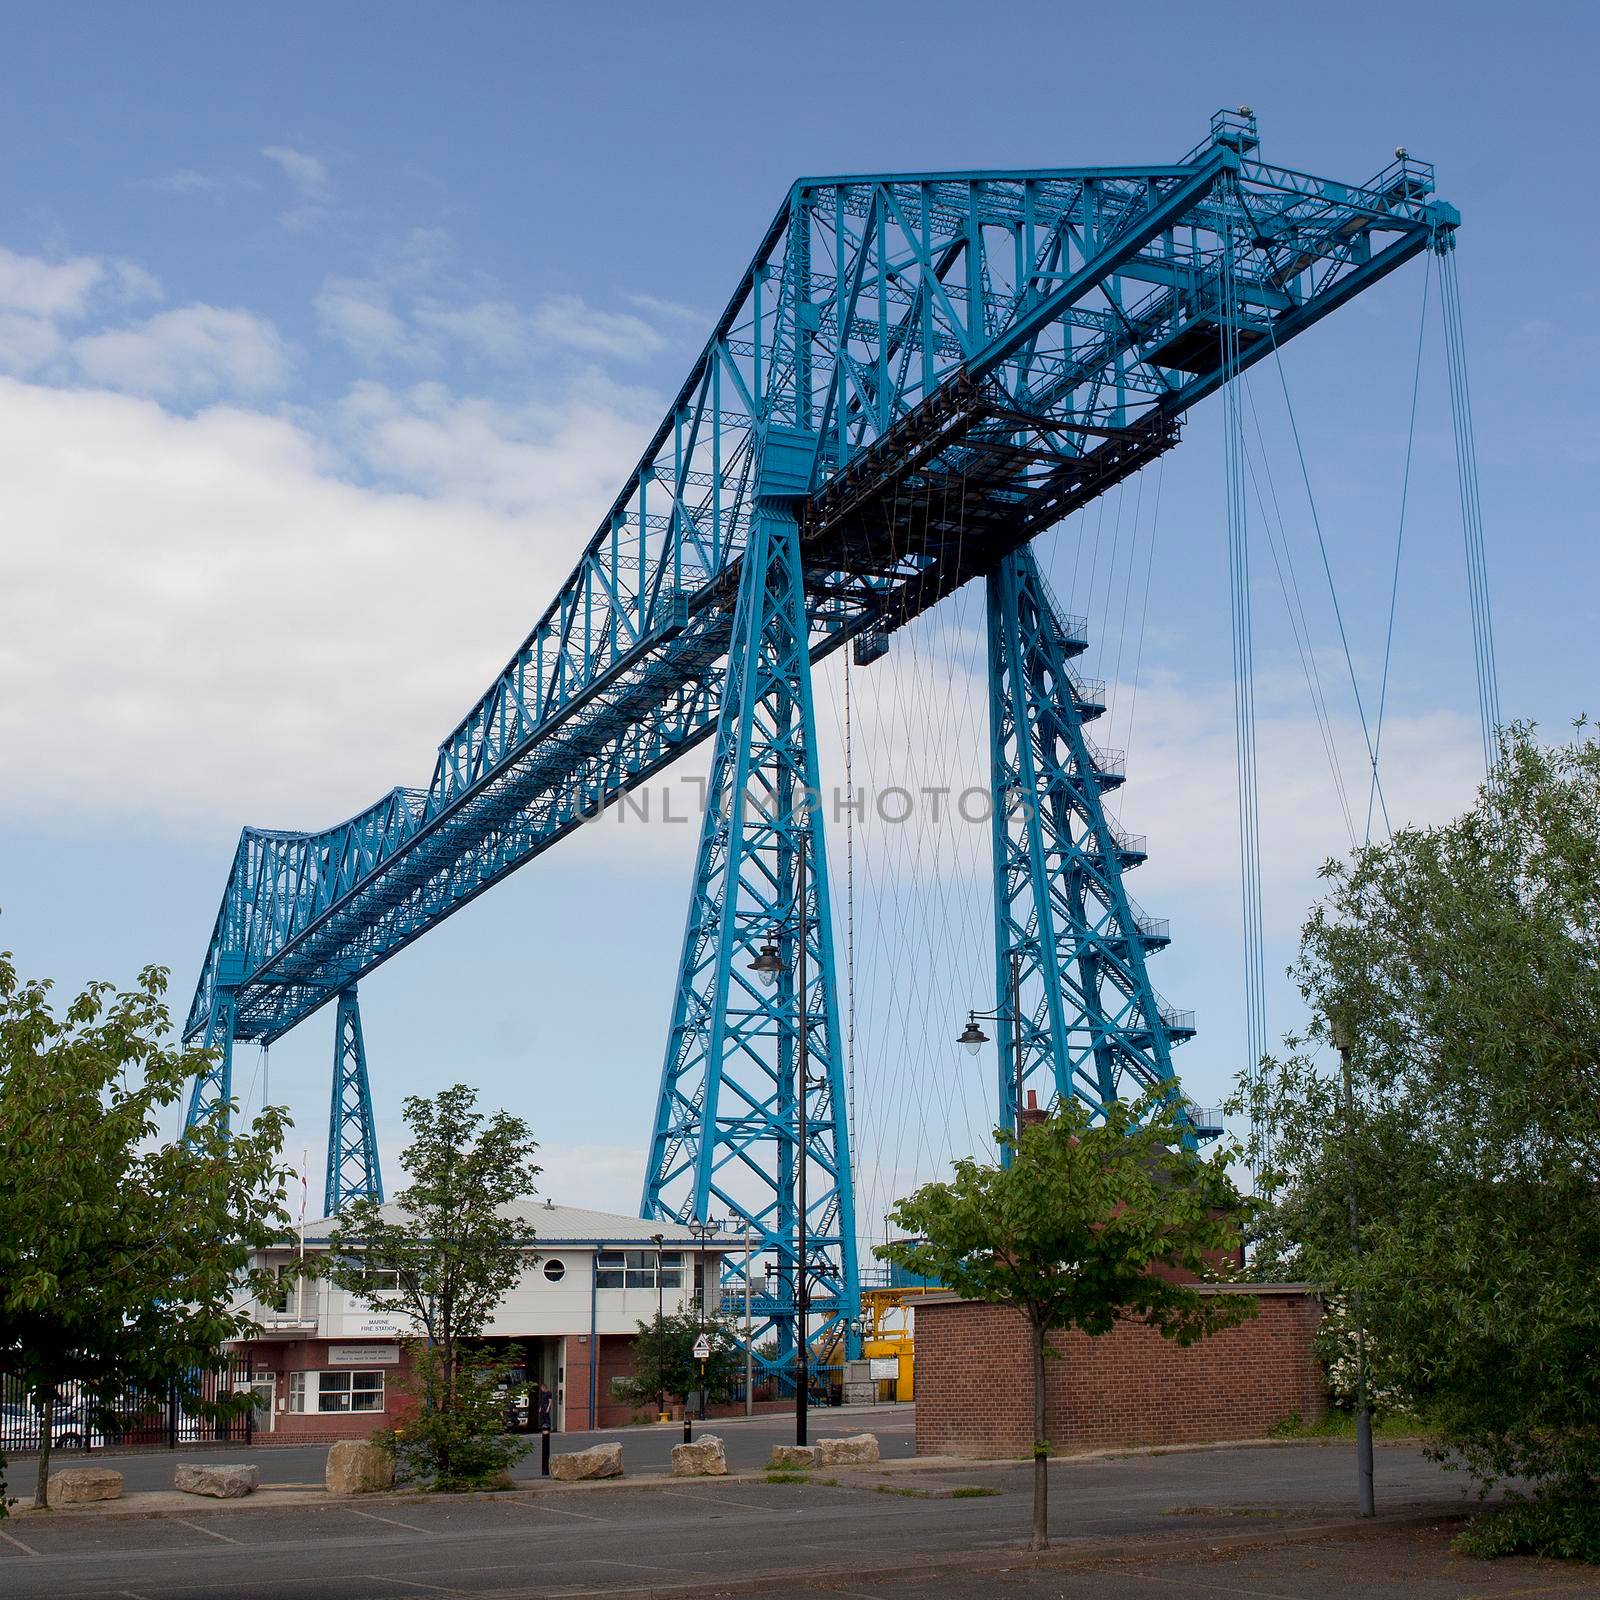 The Transporter Bridge over the river Tees at Middlesborough Cleveland UK